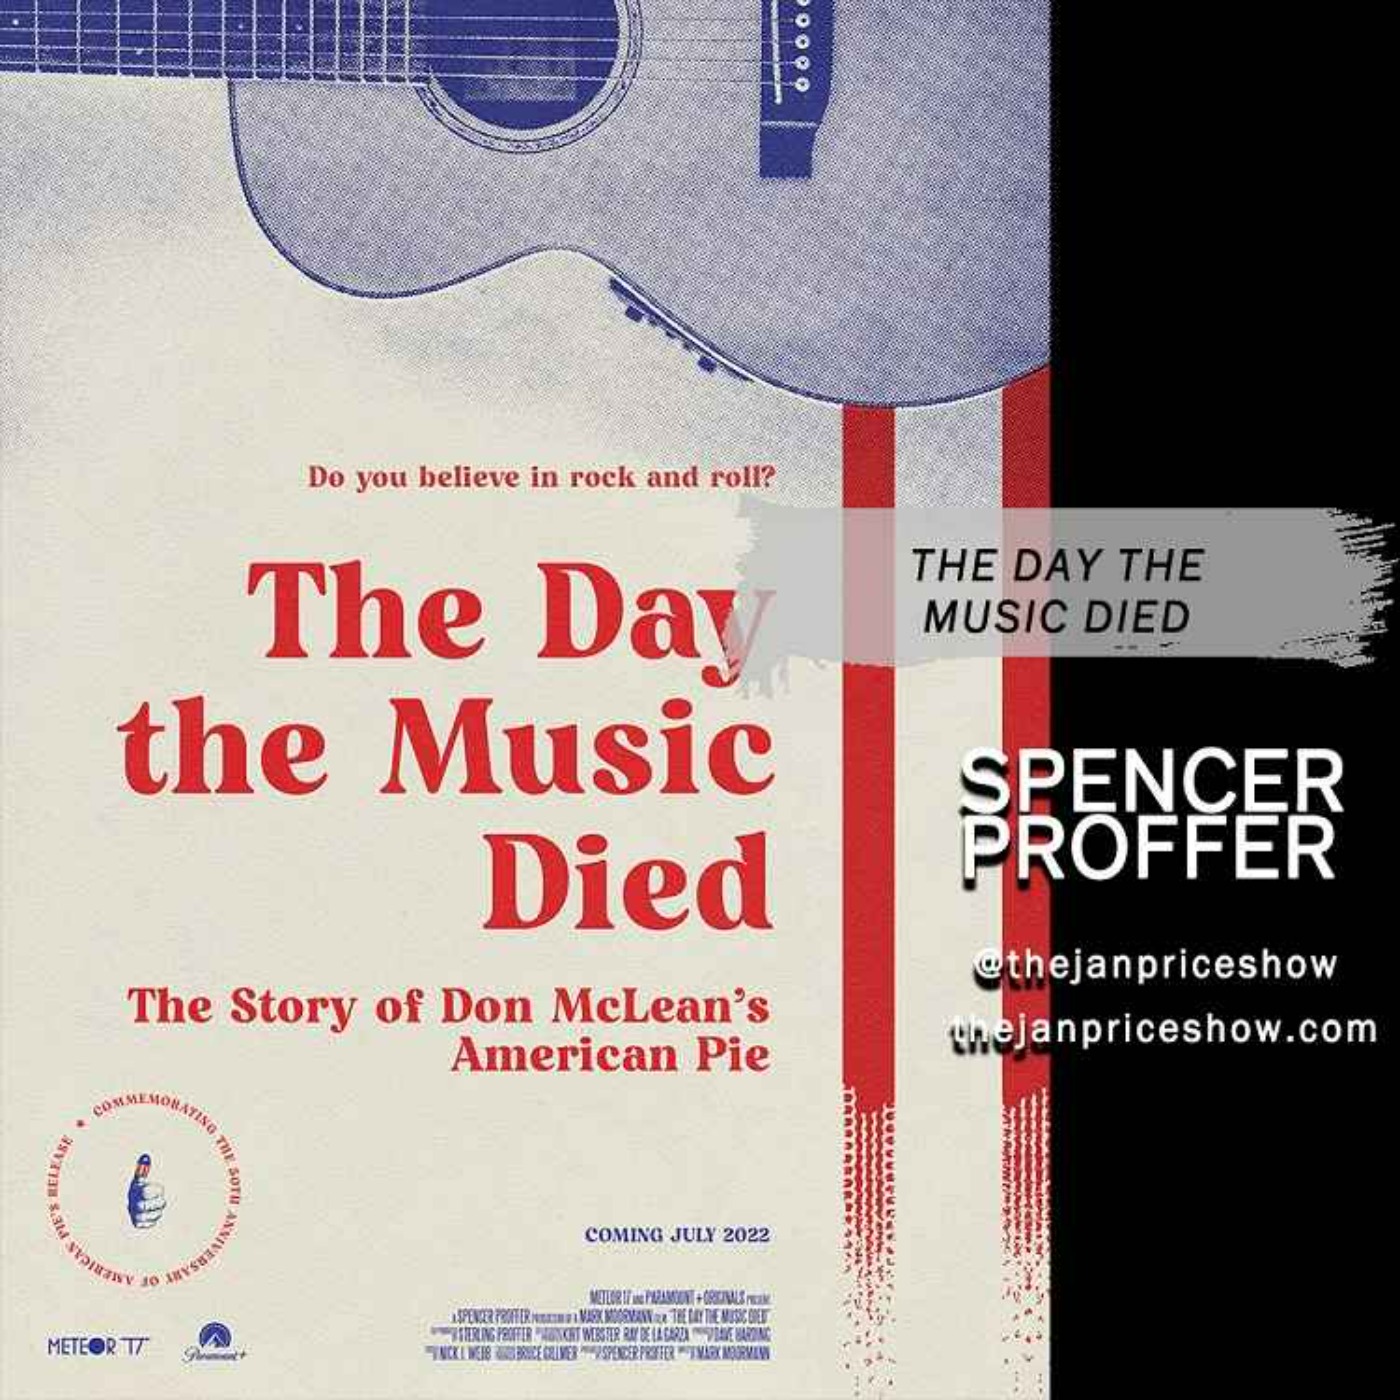 Spencer Proffer - The Day The Music Died